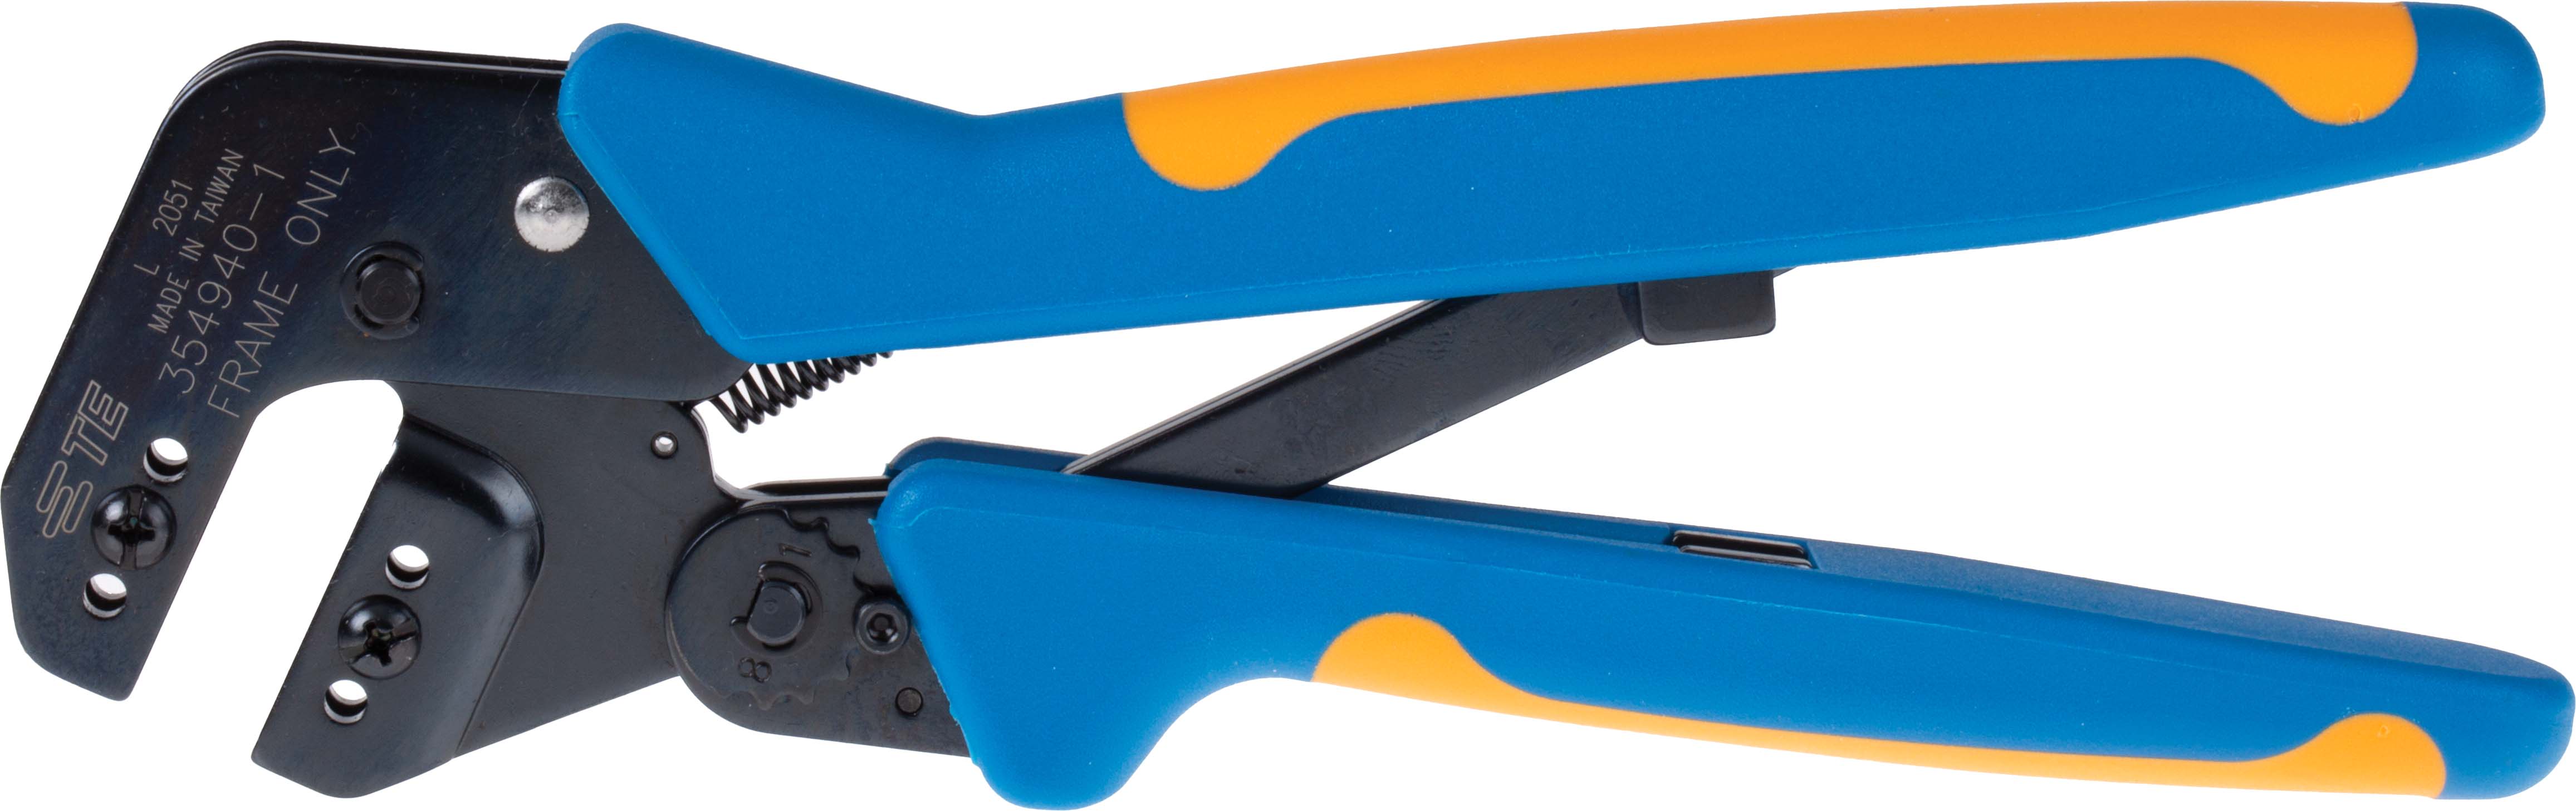 TE Connectivity PRO-CRIMPER III Hand Ratcheting Crimping Tool